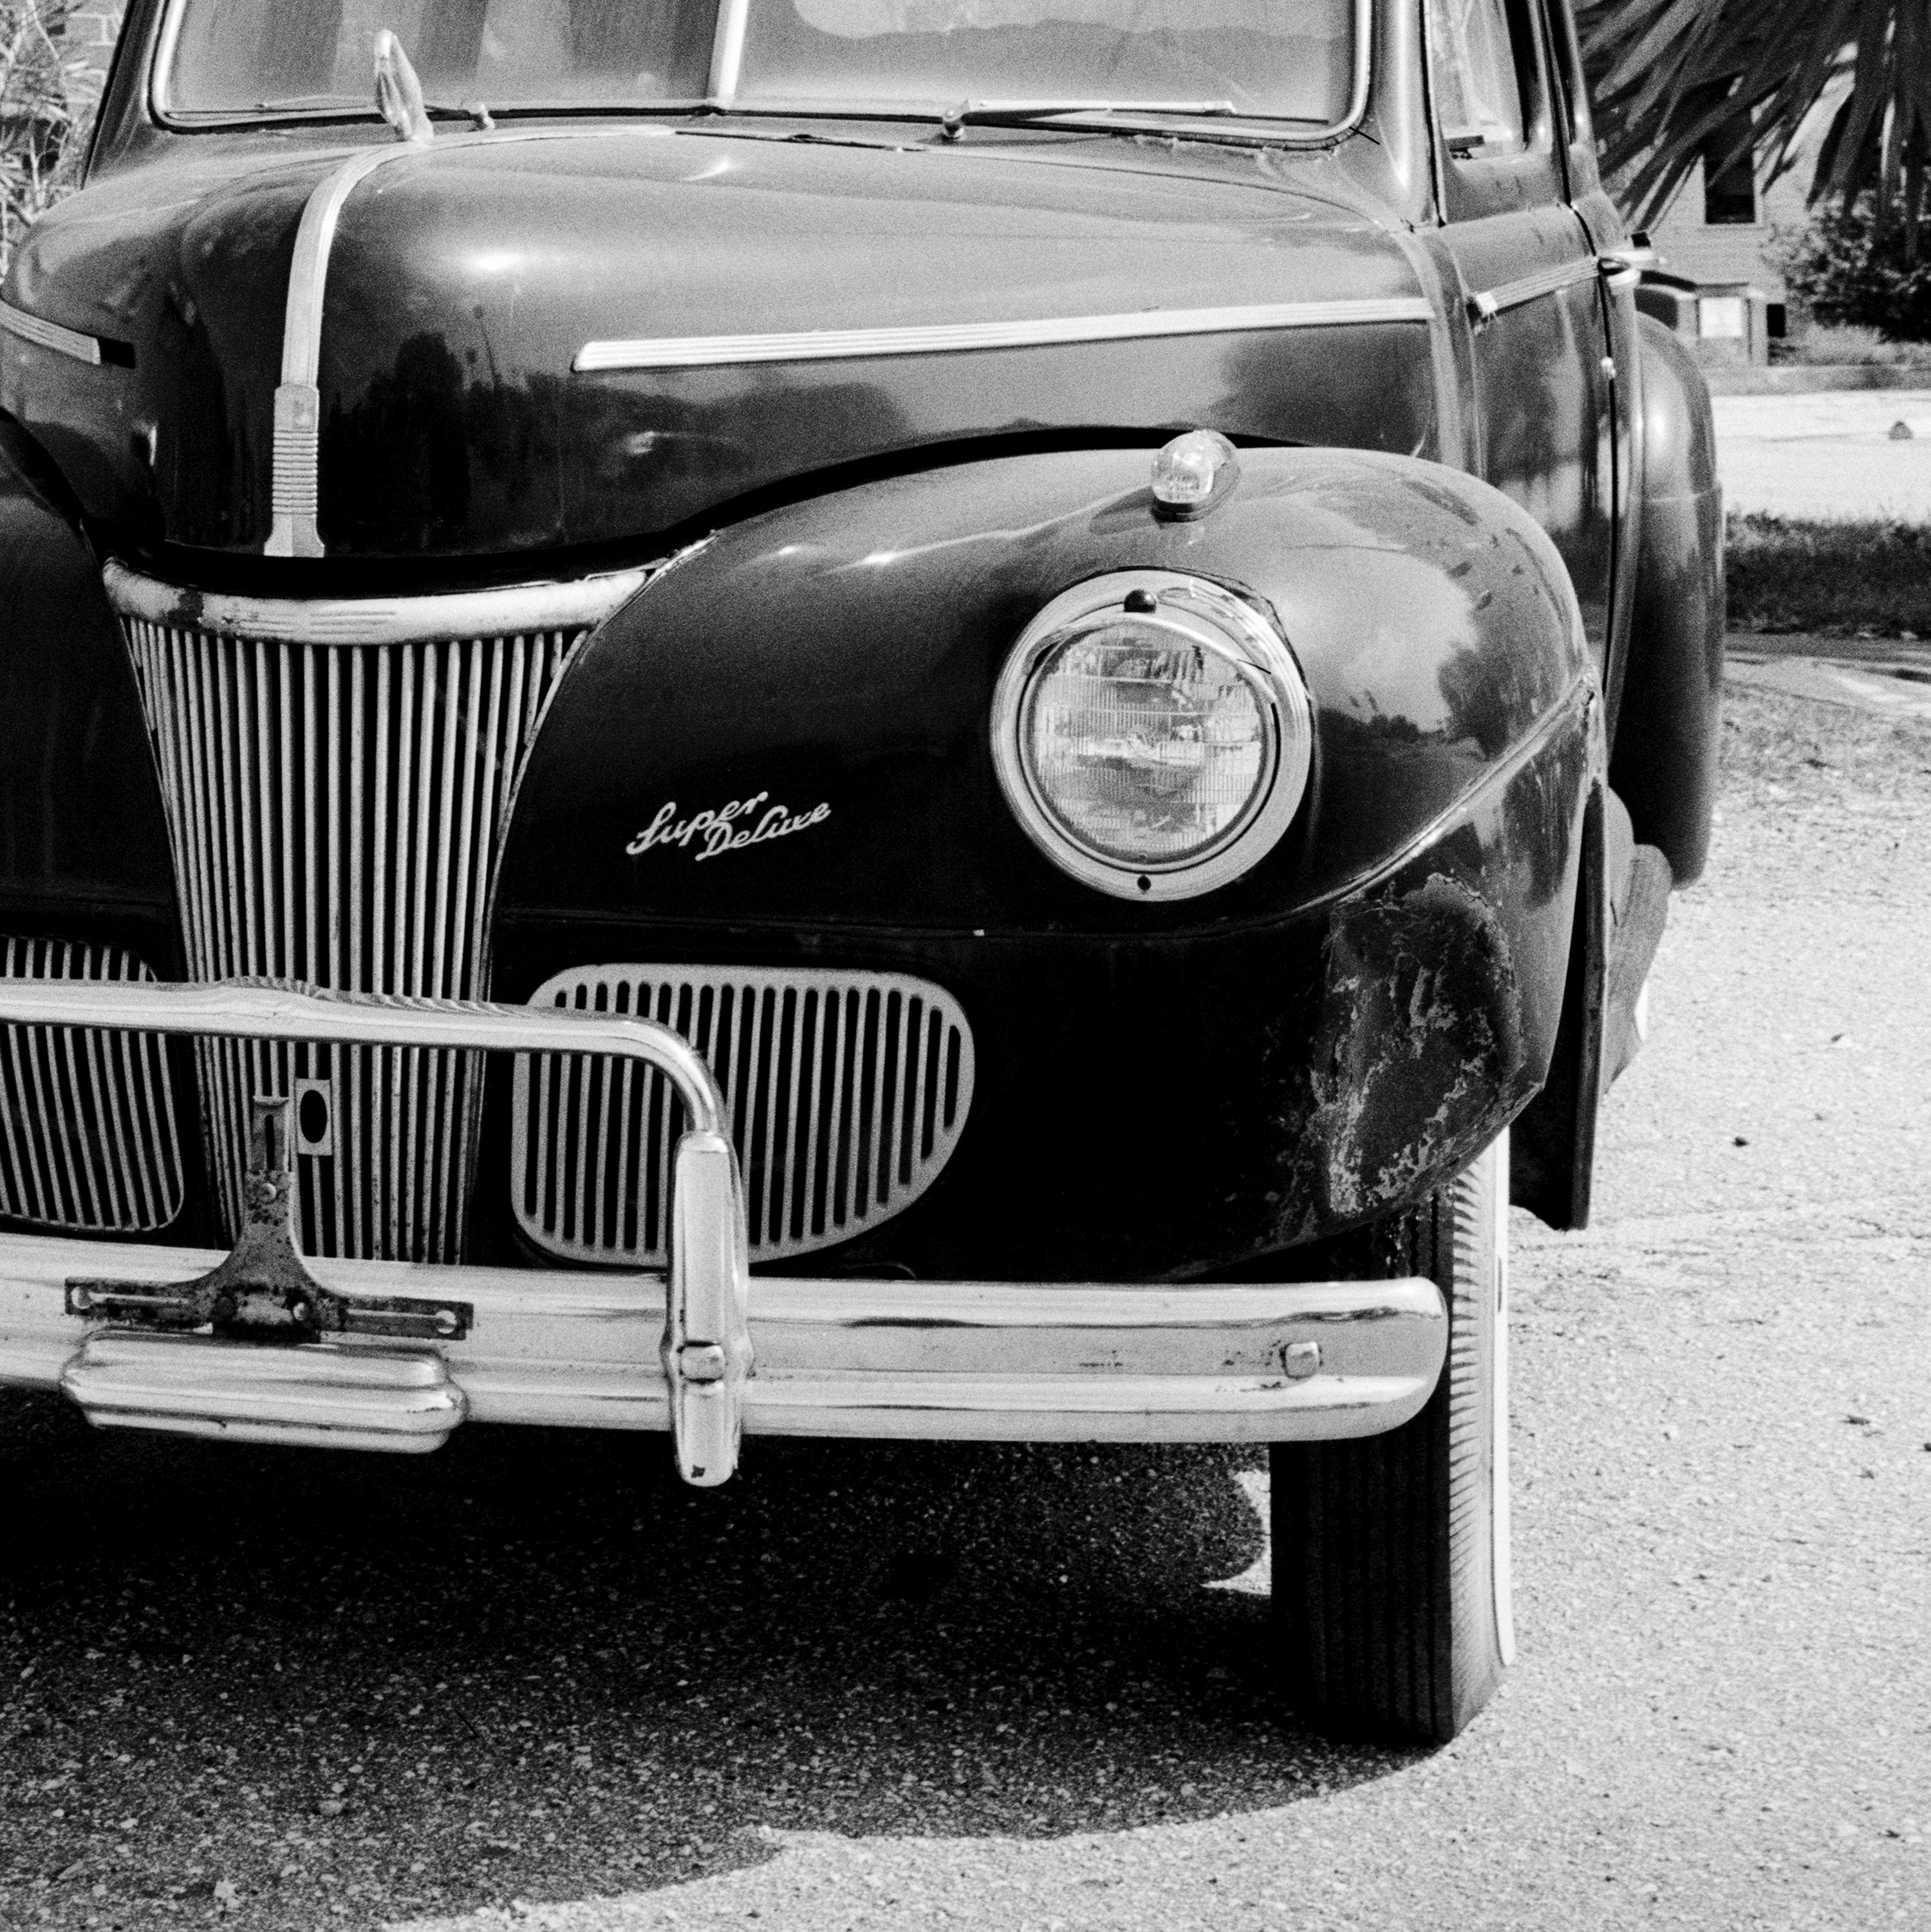 1941 Ford Super Deluxe Business Coupe, USA, black & white photography, landscape For Sale 1